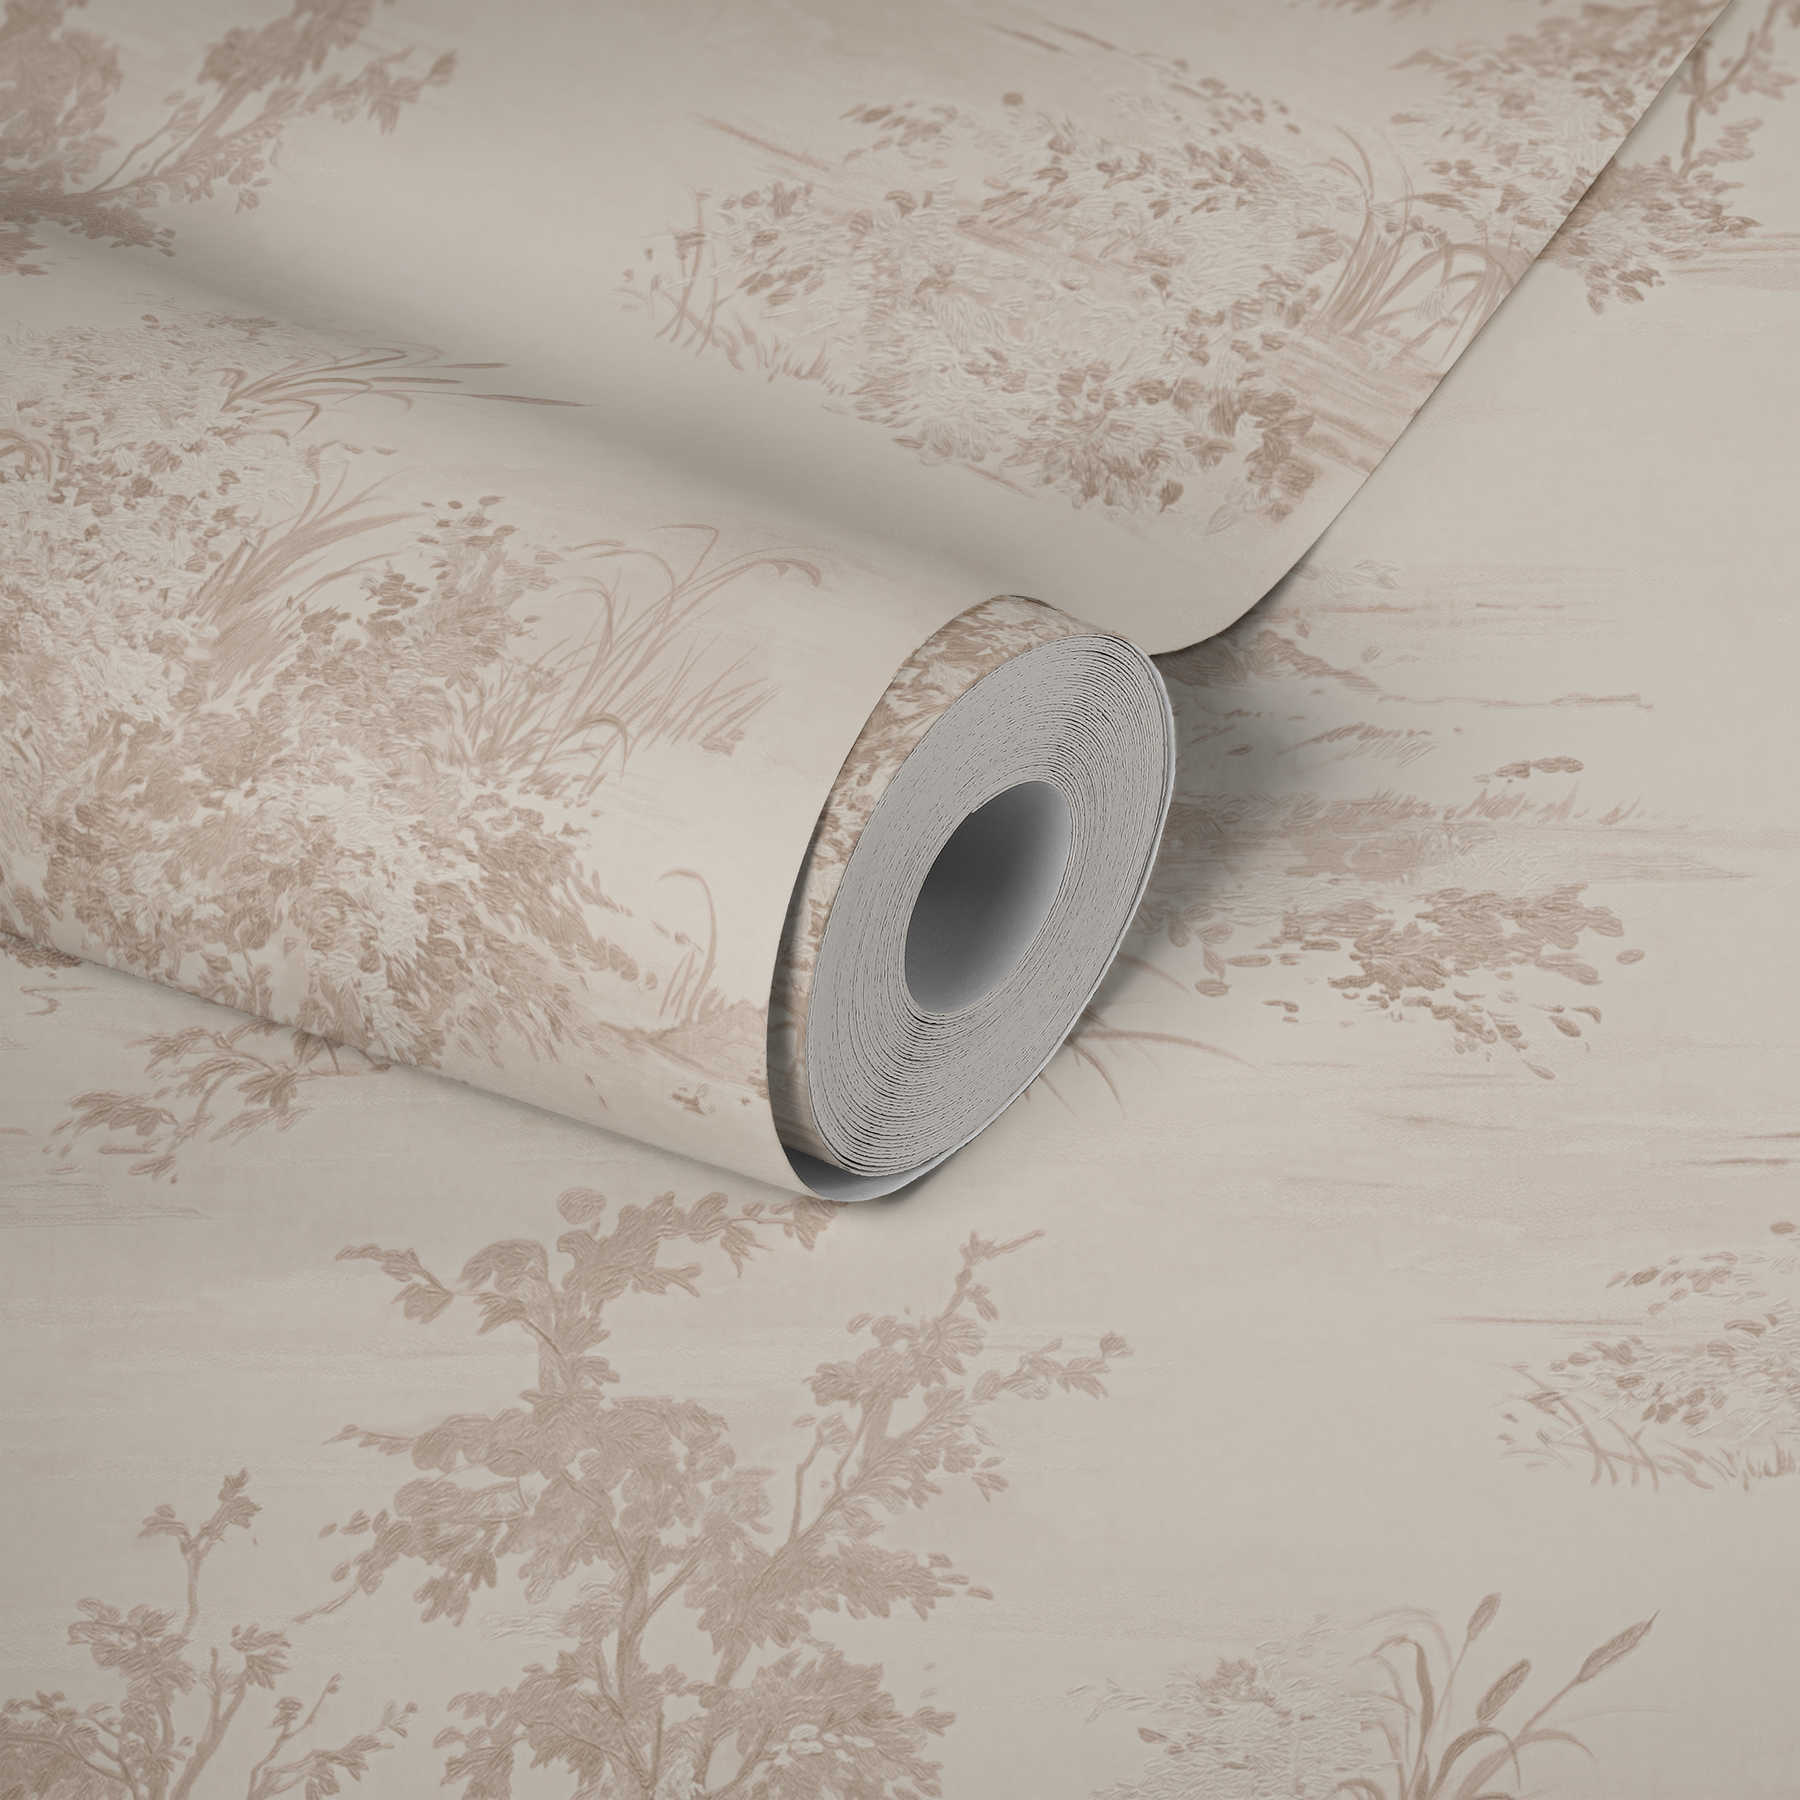             Country house wallpaper in historical style with landscape motif - beige, cream, pink
        